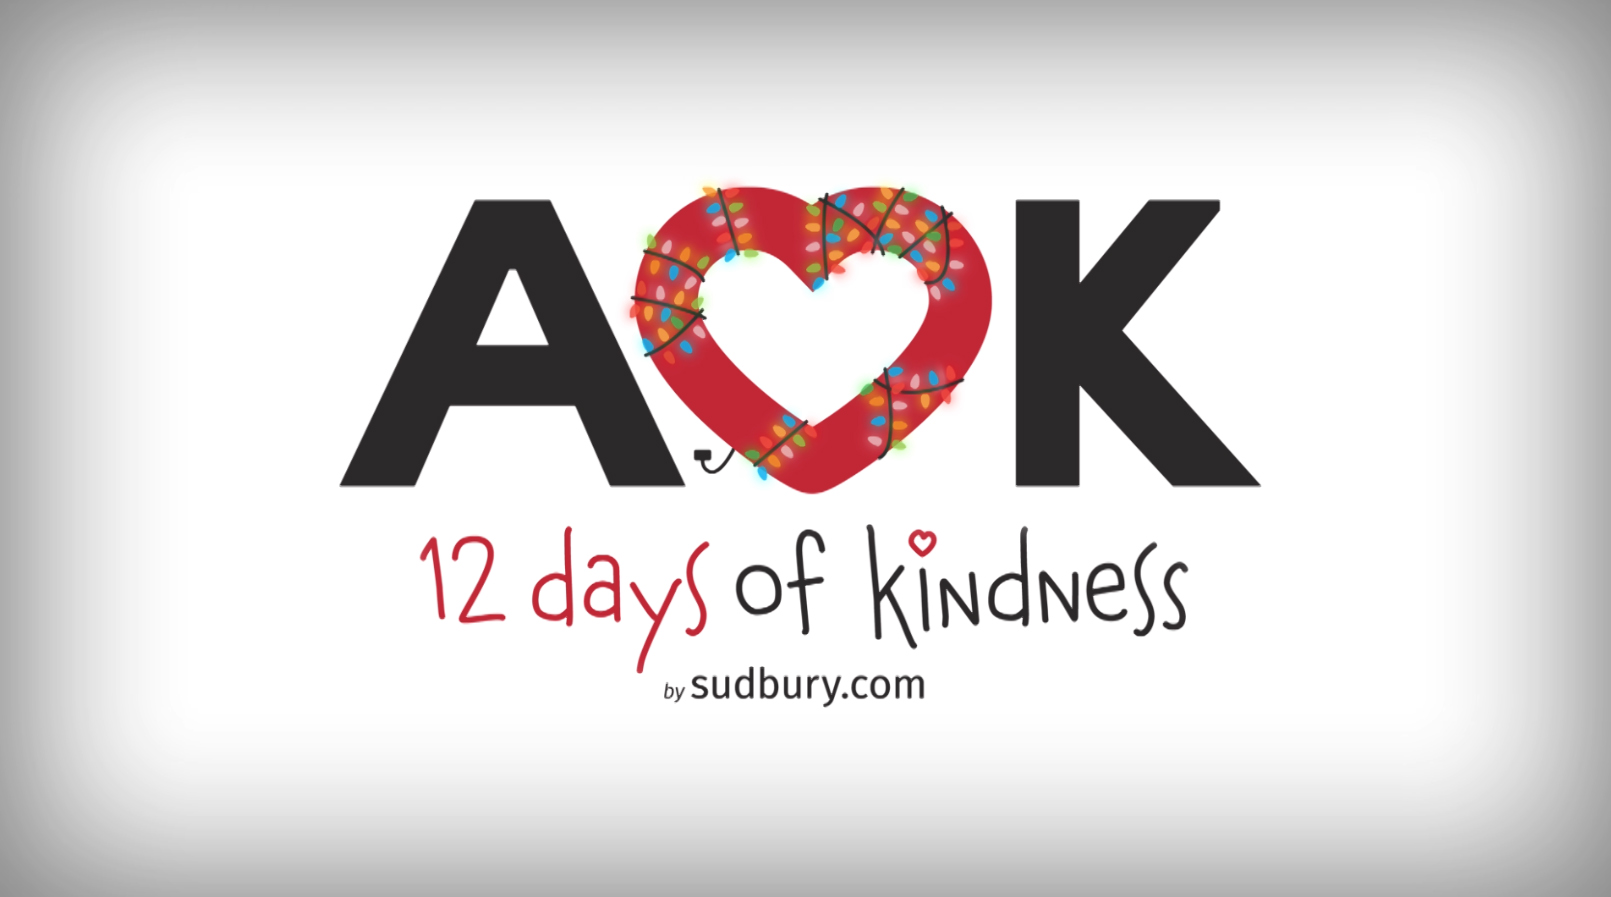 12 Days of Kindness returns! Help us spread joy to deserving Sudburians this Christmas